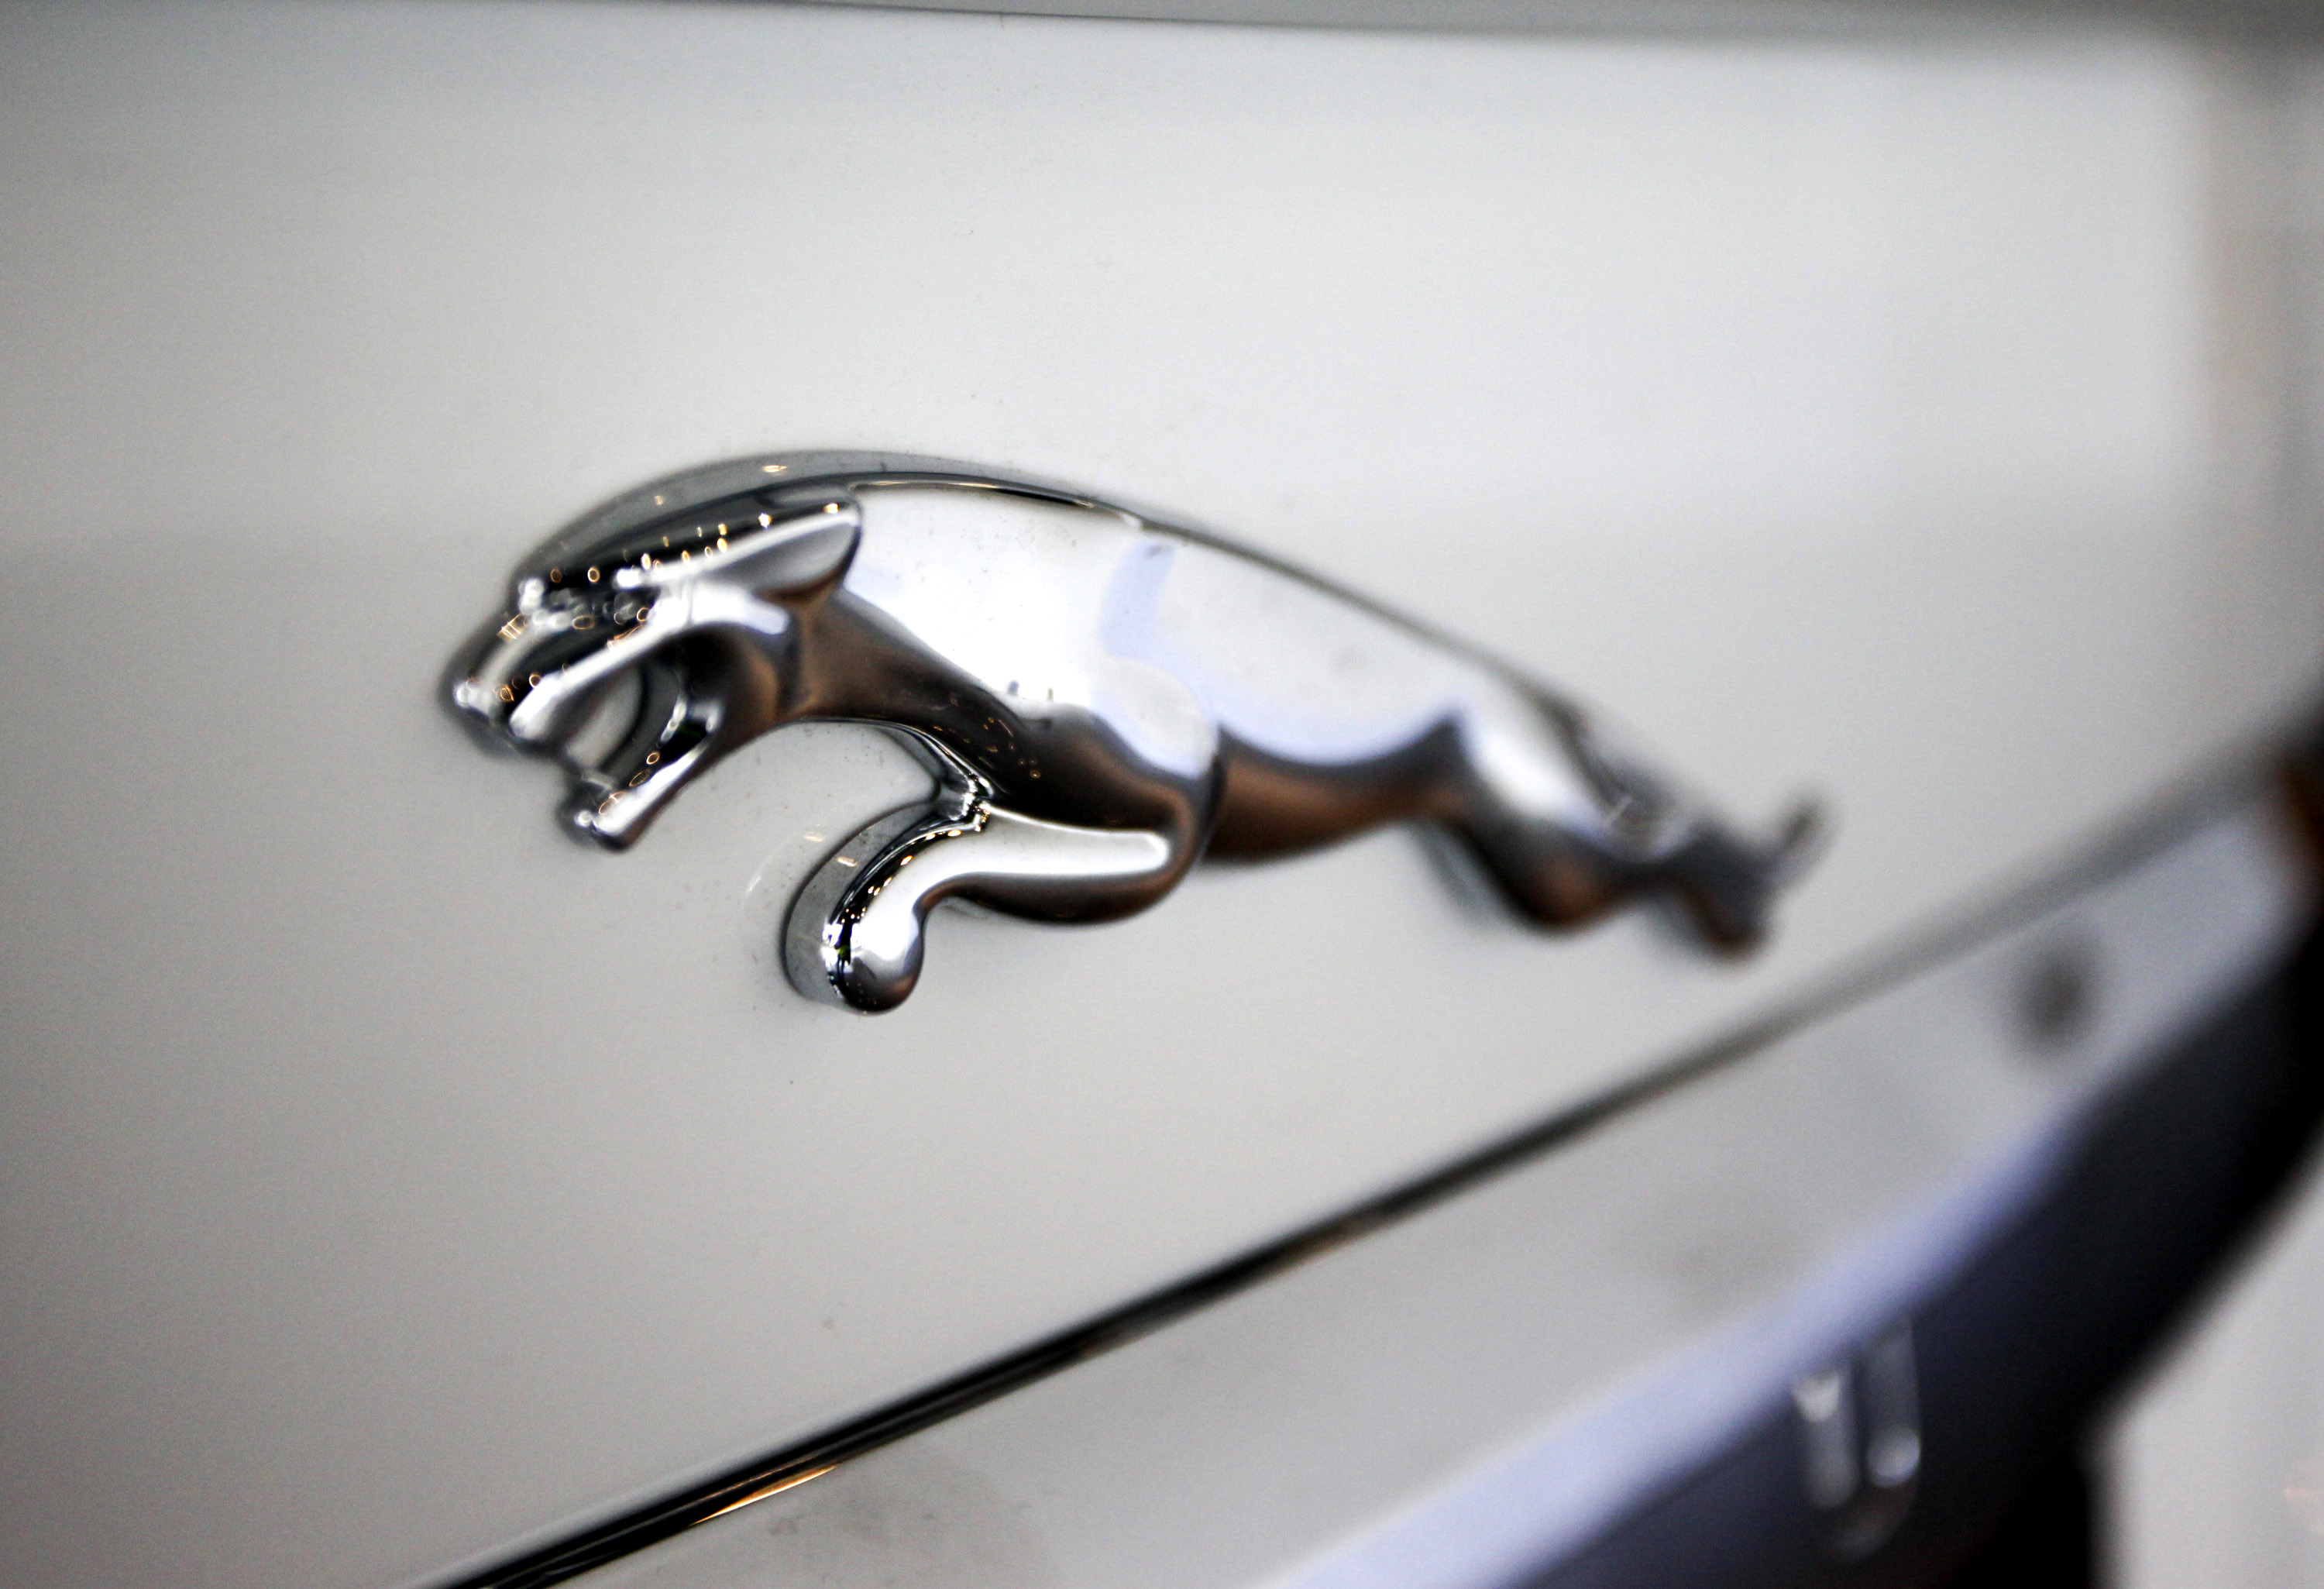 Tata IPO Would Help Solve Jaguar Land Rover's Challenges - Bloomberg